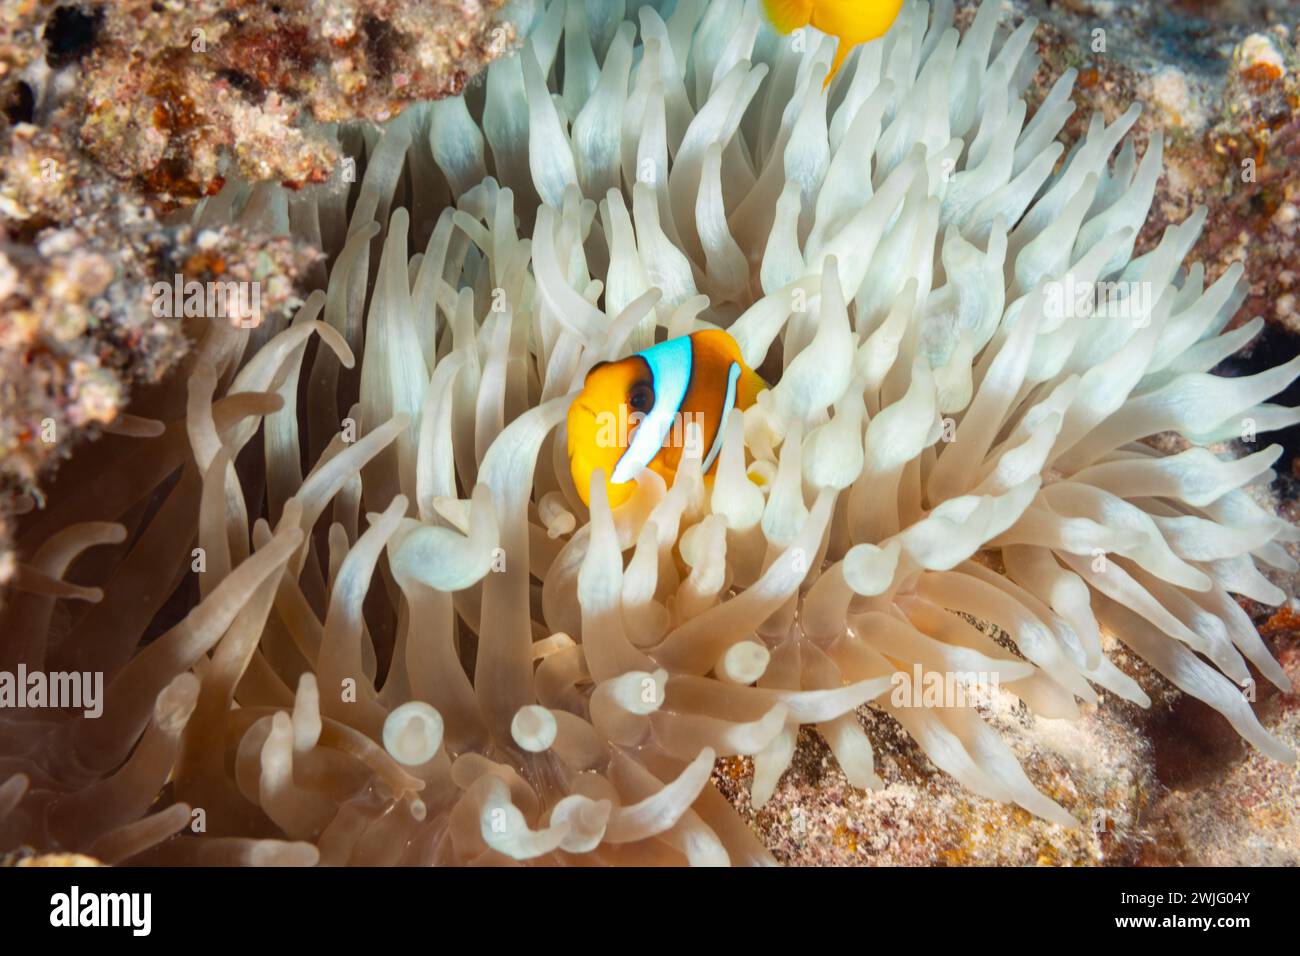 Clown Anemone Fish, amphiprion ocellaris, hides in white Sea Anemone, actiniaria, with long tentacles on coral reef Stock Photo